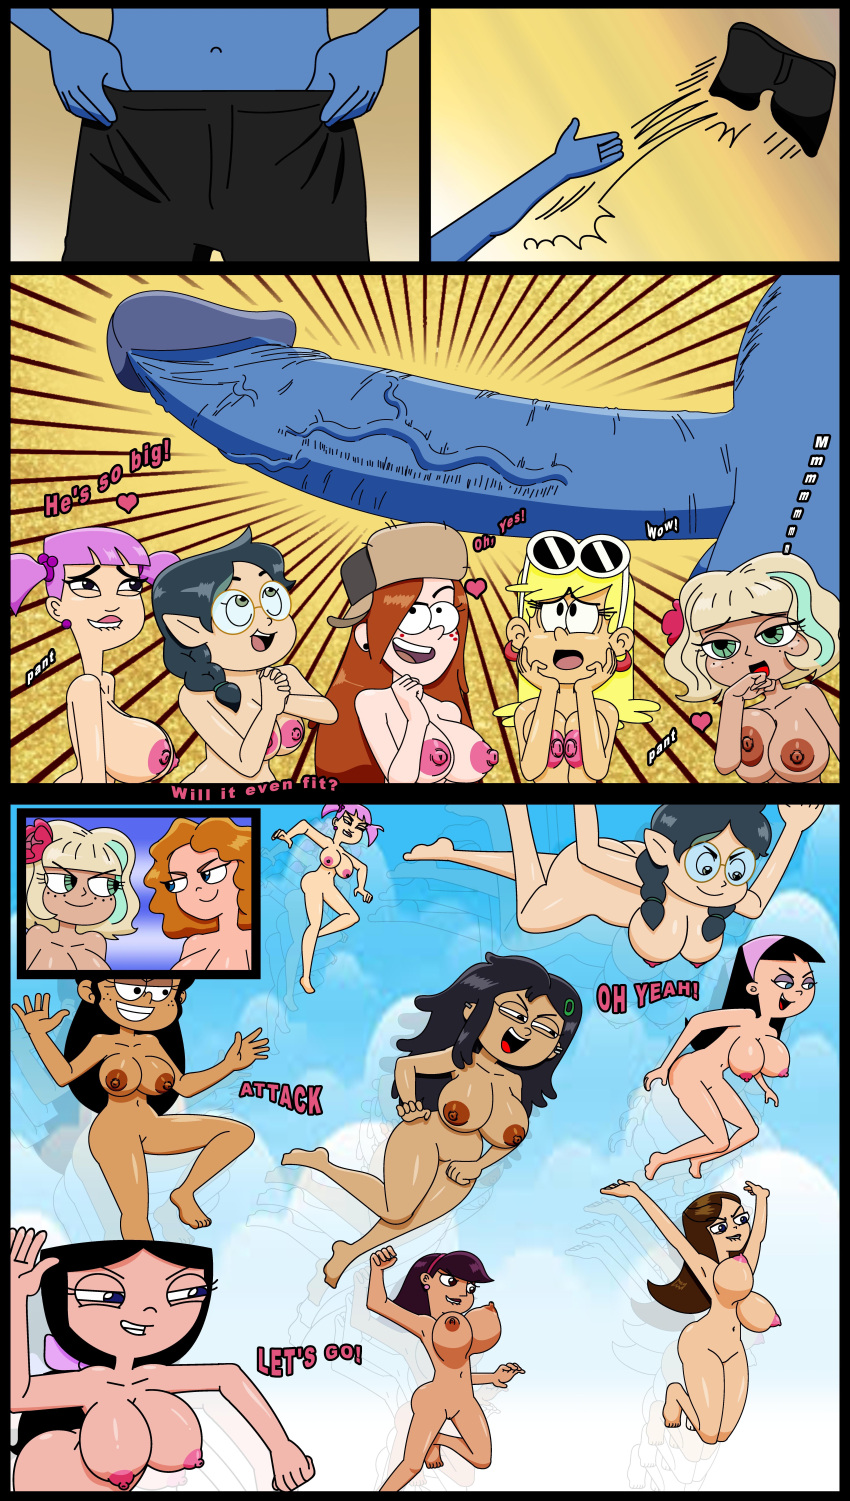 12girls amanda_lopez amphibia big_breasts completely_nude_female ferozyraptor gravity_falls hamster_and_gretel harem hiromi_tanaka huge_penis isabella_garcia-shapiro jackie_lynn_thomas leni_loud marcy_wu melissa_chase milo_murphy's_law phineas_and_ferb ronnie_anne_santiago star_vs_the_forces_of_evil the_dream_harem the_fairly_oddparents the_loud_house the_owl_house trixie_tang vanessa_doofenshmirtz wendy_corduroy willow_park